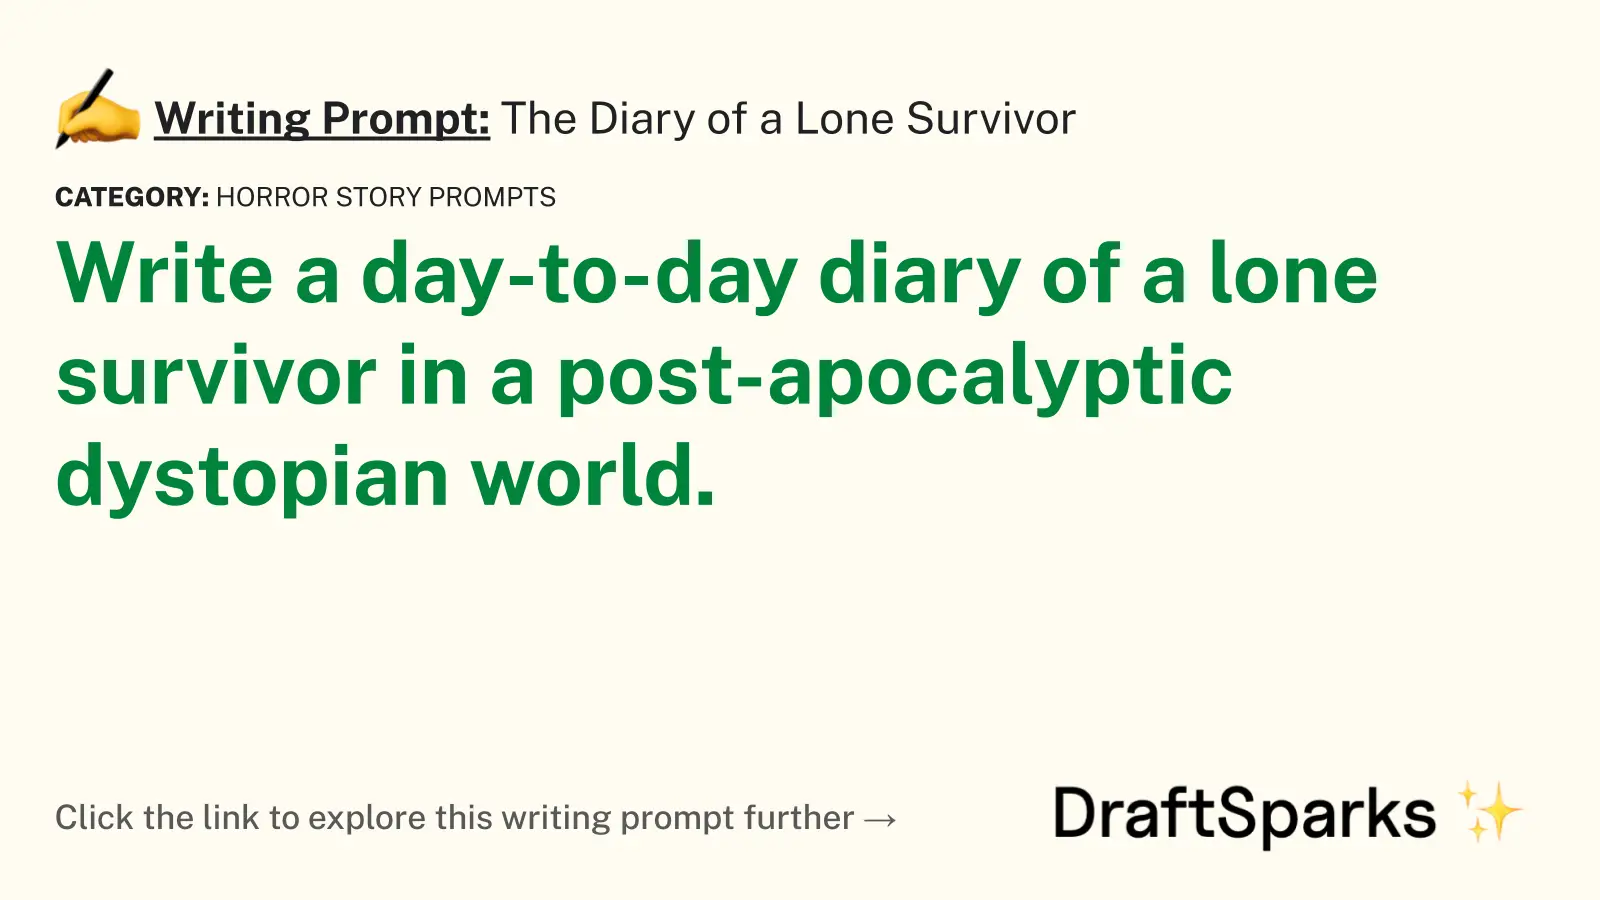 The Diary of a Lone Survivor